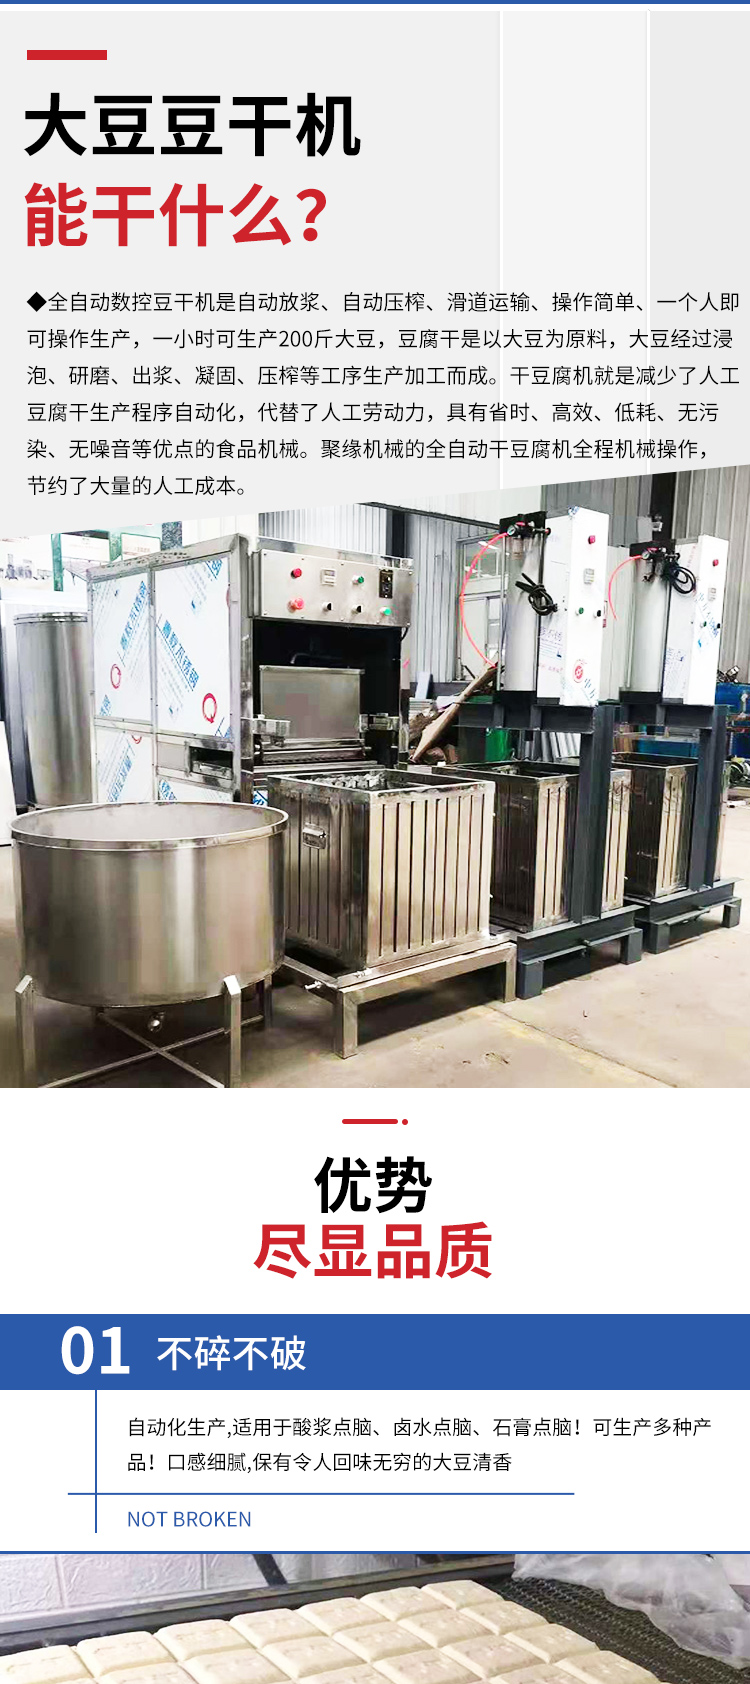 Air pressure pressing dried tofu machine Automatic dried bean curd processing machine Assembly line production equipment for bean products